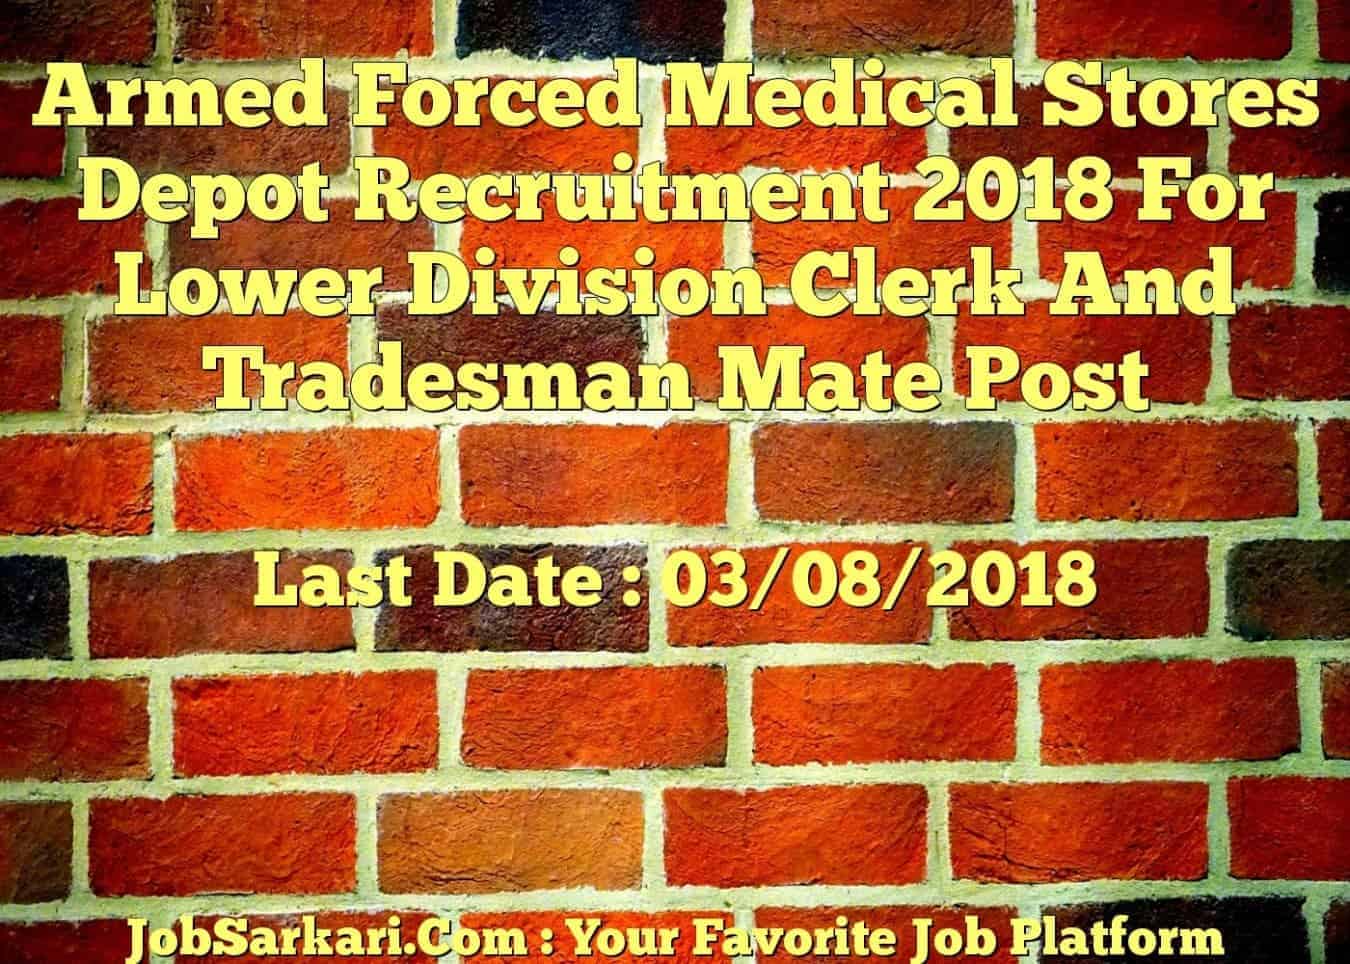 Armed Forced Medical Stores Depot Recruitment 2018 For Lower Division Clerk And Tradesman Mate Post